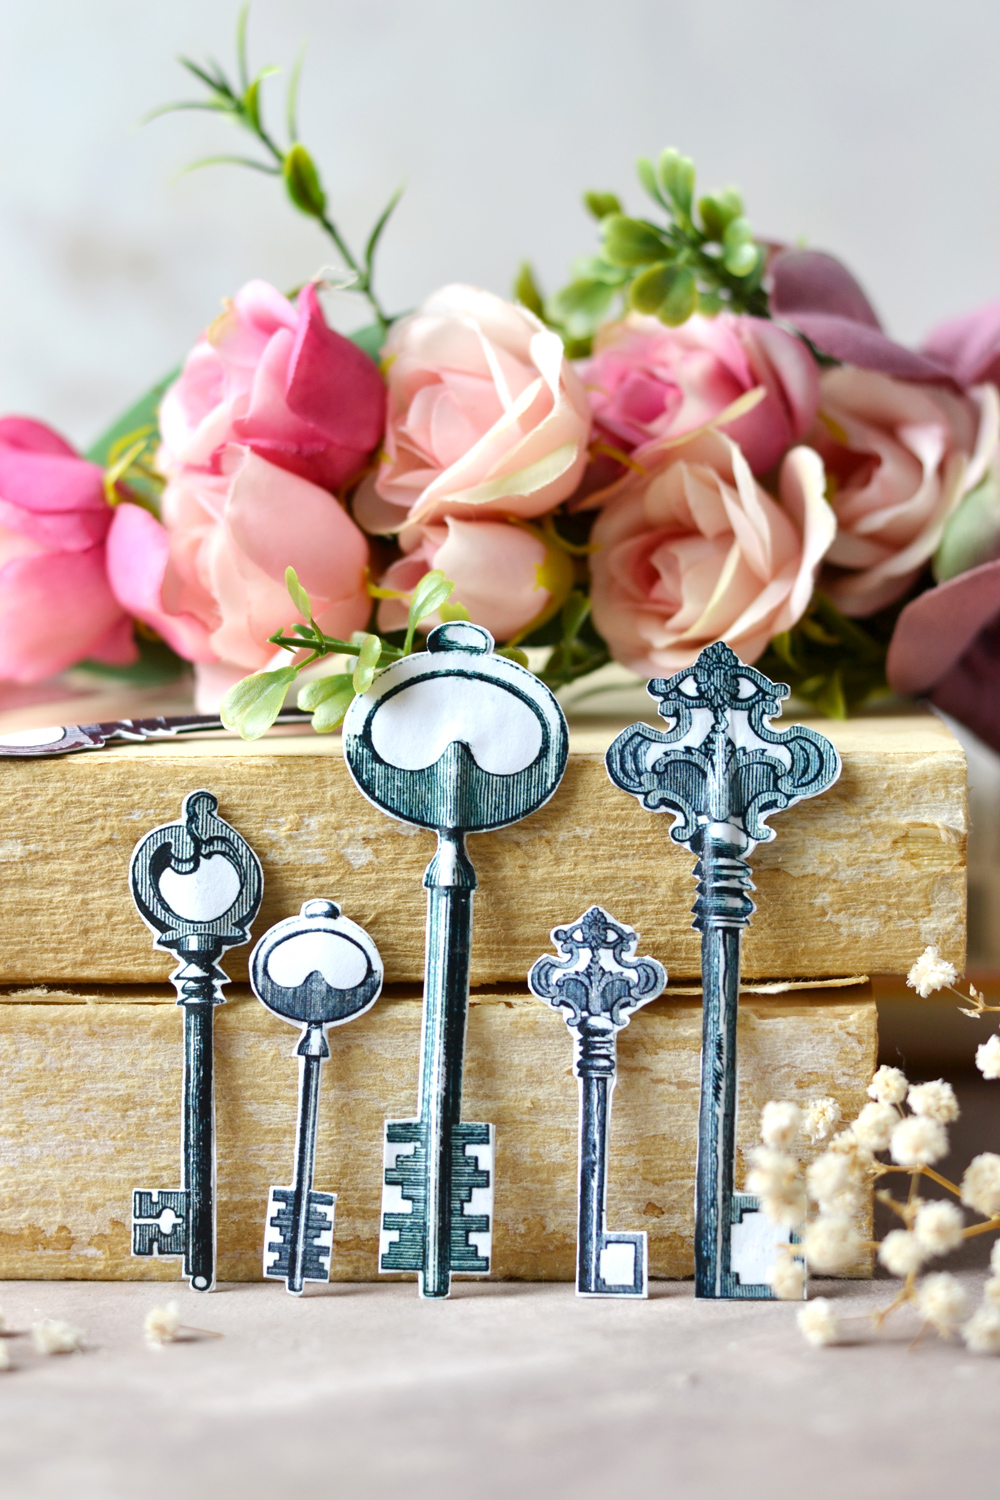 Learn how to make beautiful DIY Vintage Paper Key Tags to decorate your farmhouse, Shabby Chic or Vintage home with style ... and open new doors and opportunities for the new decade!